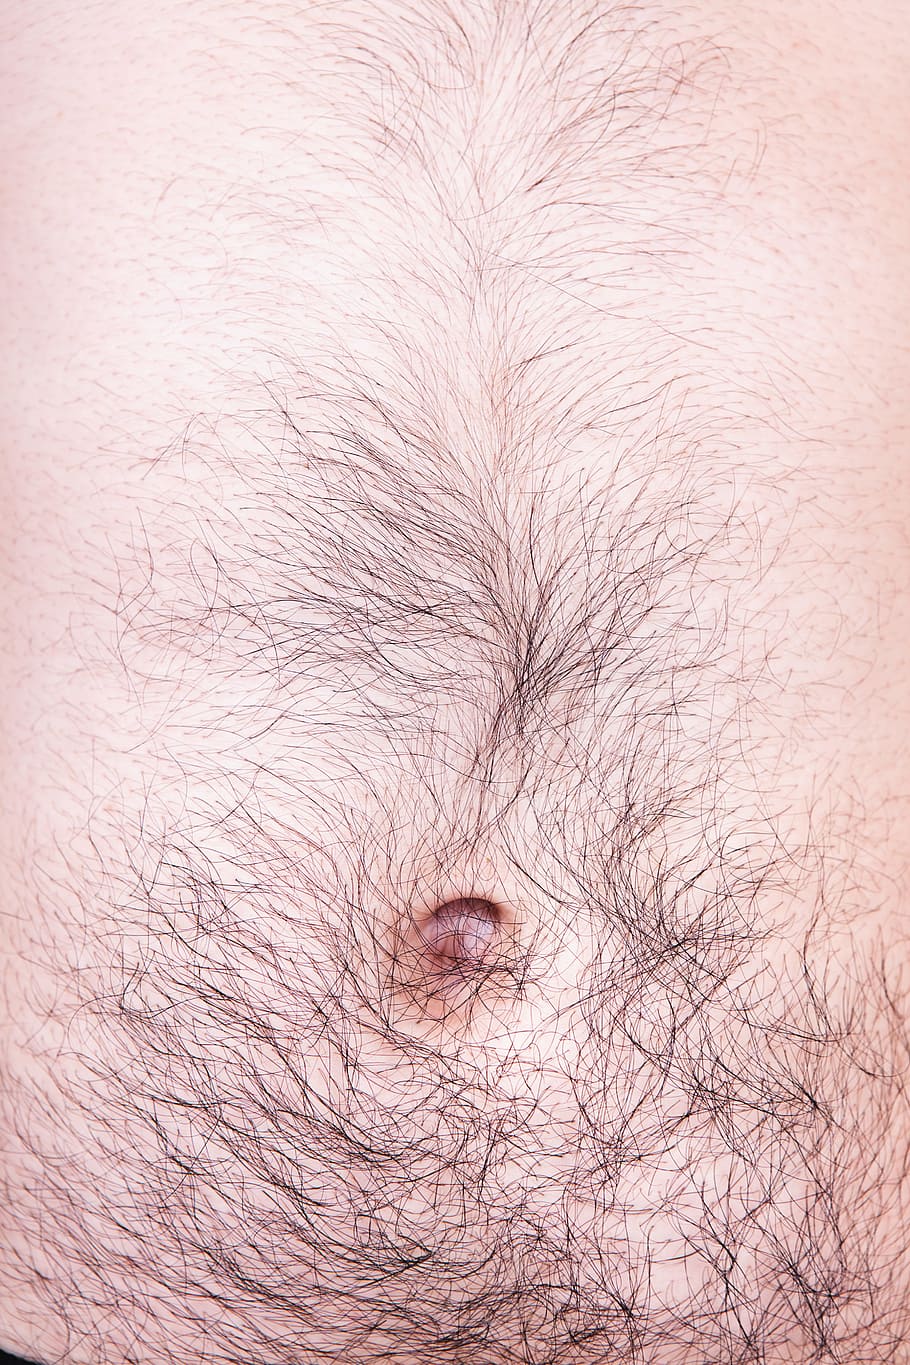 stomach, nable, hair, body, male, skin, human body part, human skin, one person, body part